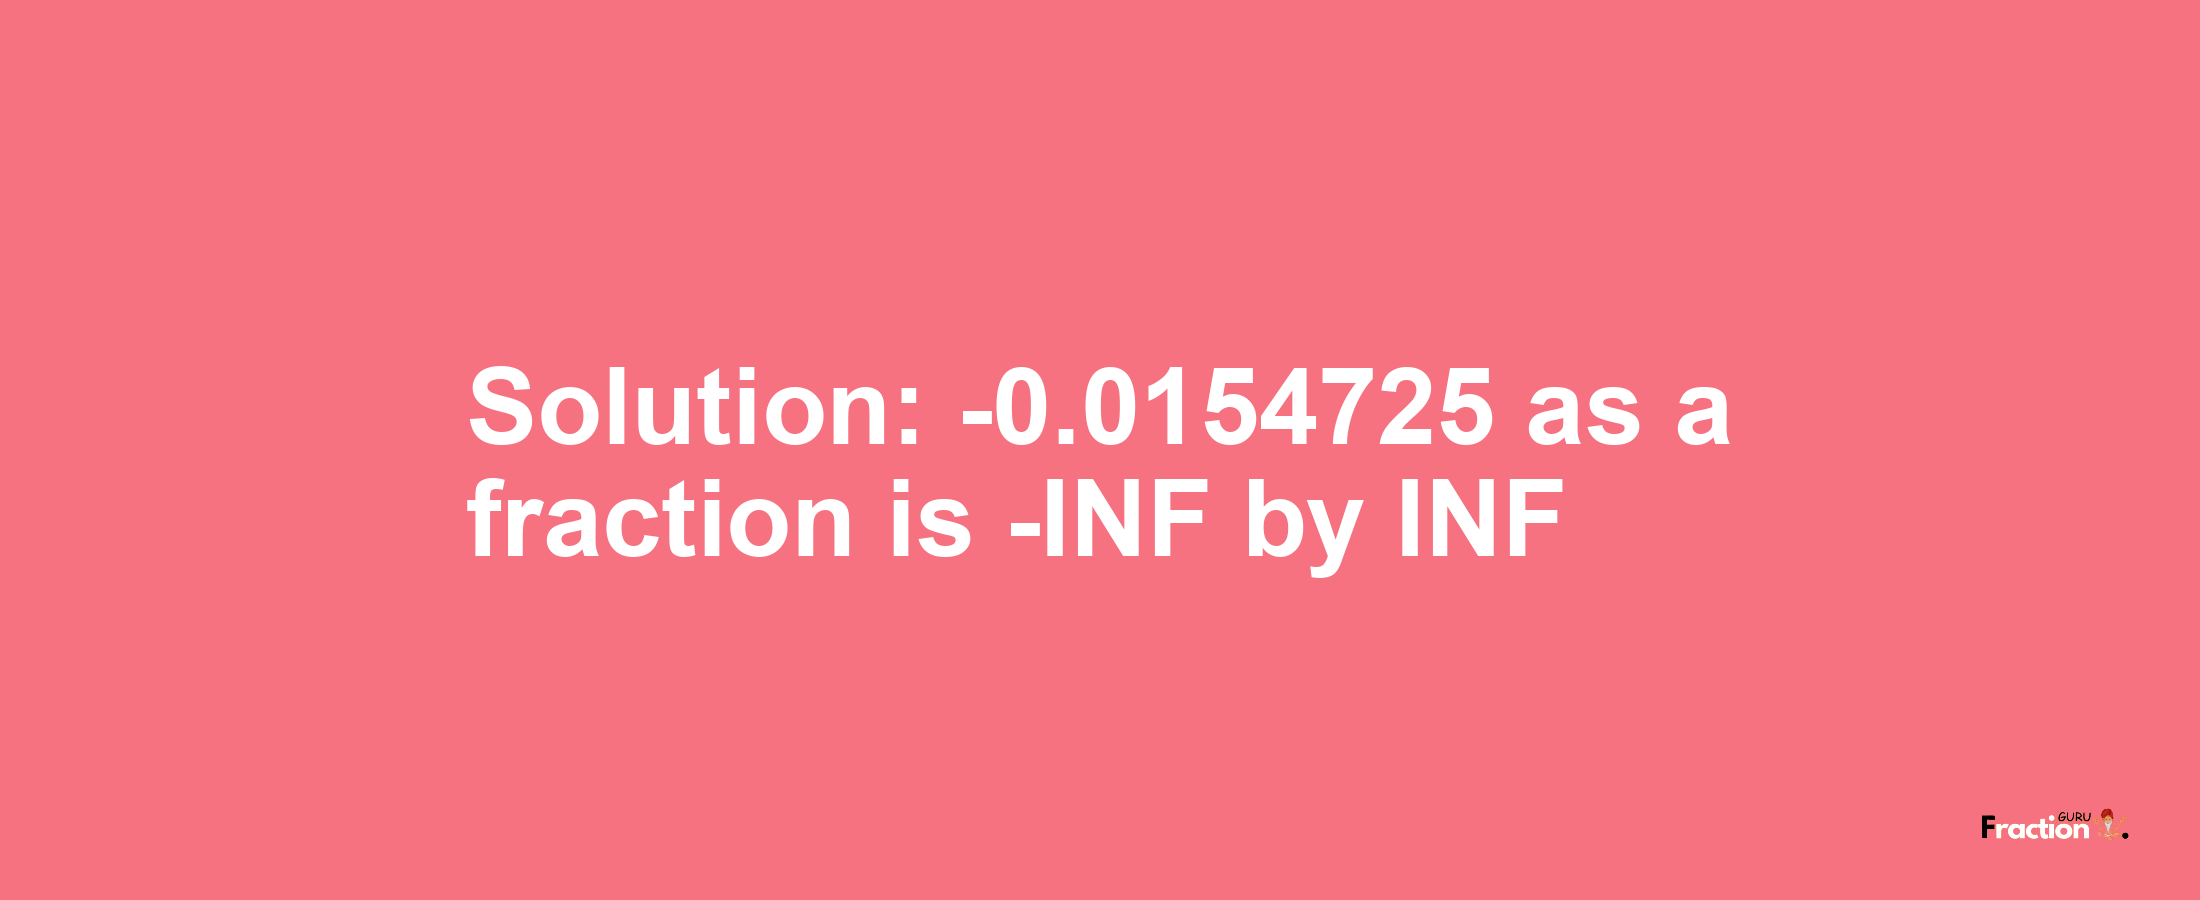 Solution:-0.0154725 as a fraction is -INF/INF